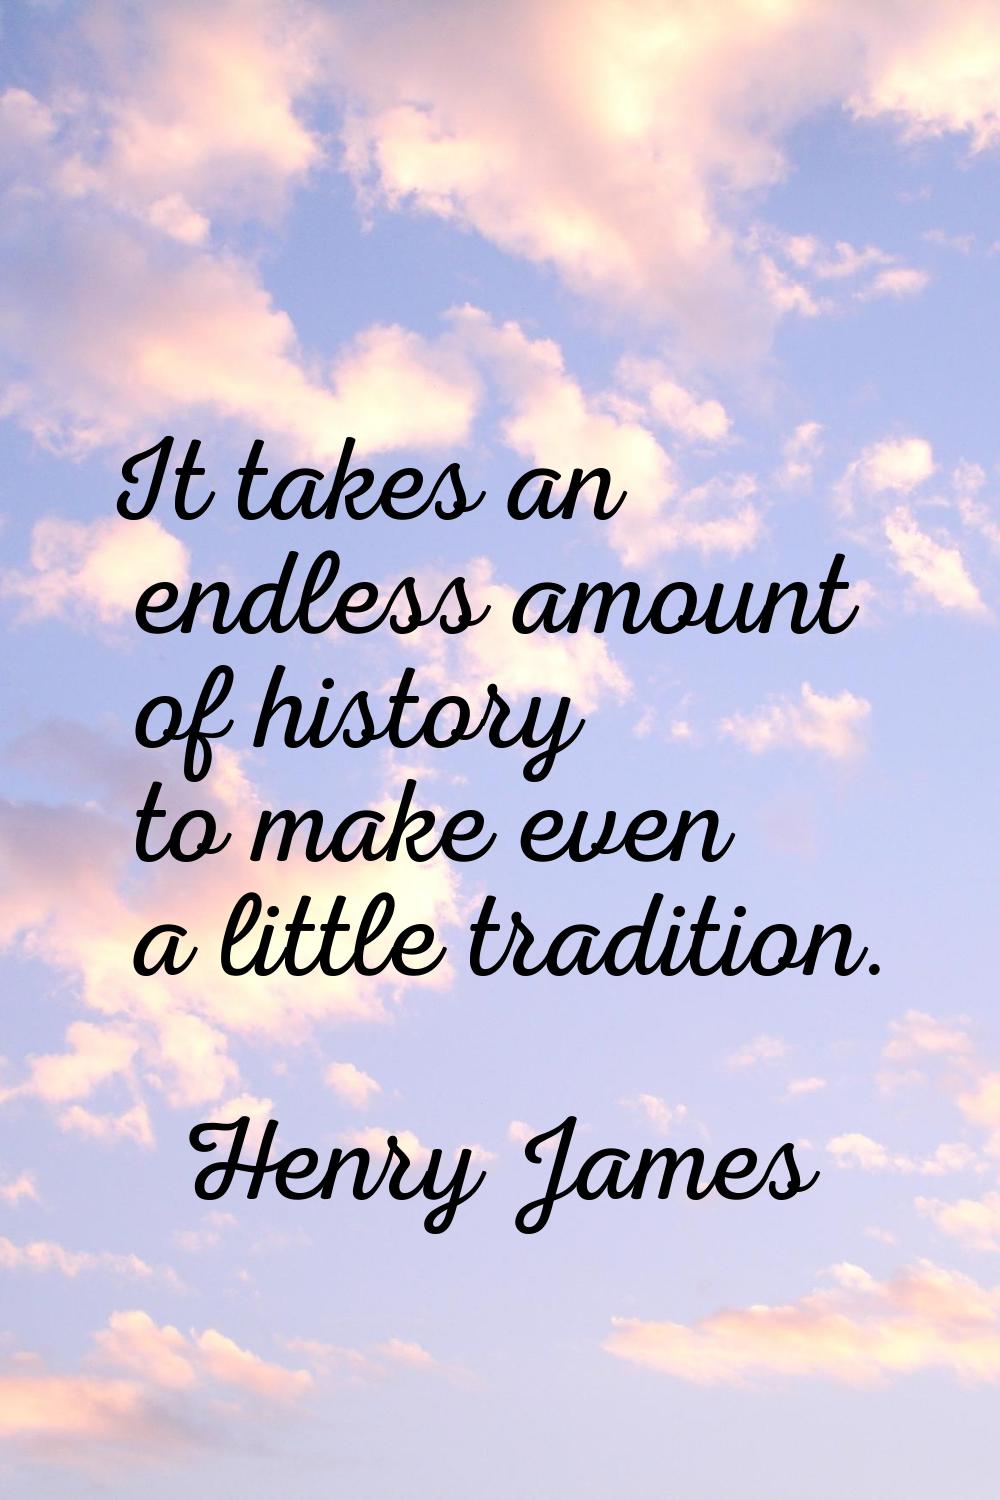 It takes an endless amount of history to make even a little tradition.